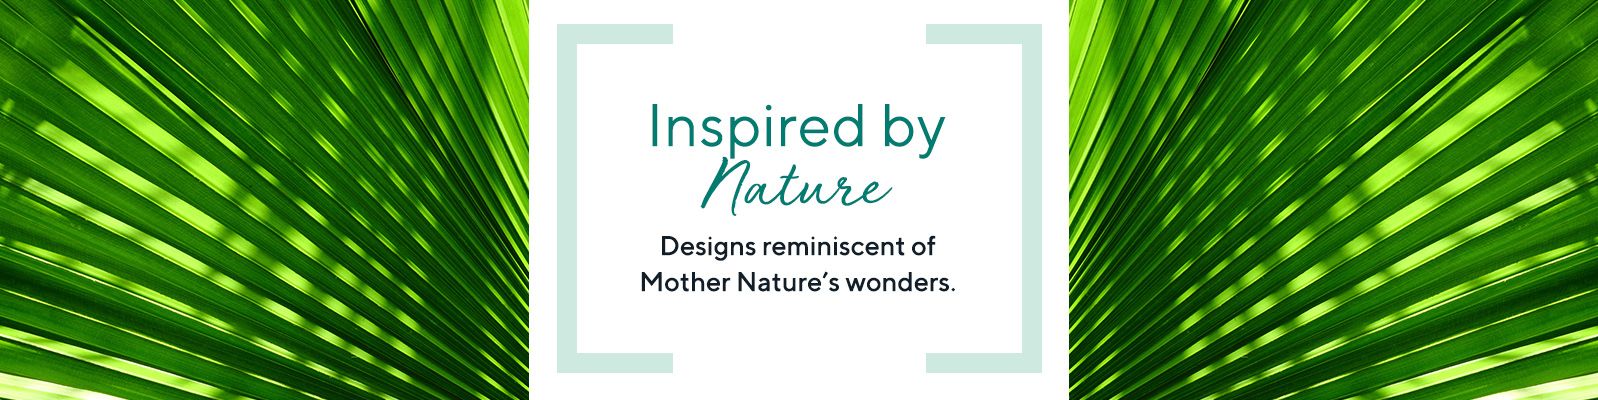 Inspired by Nature - Designs reminiscent of Mother Nature's wonders.